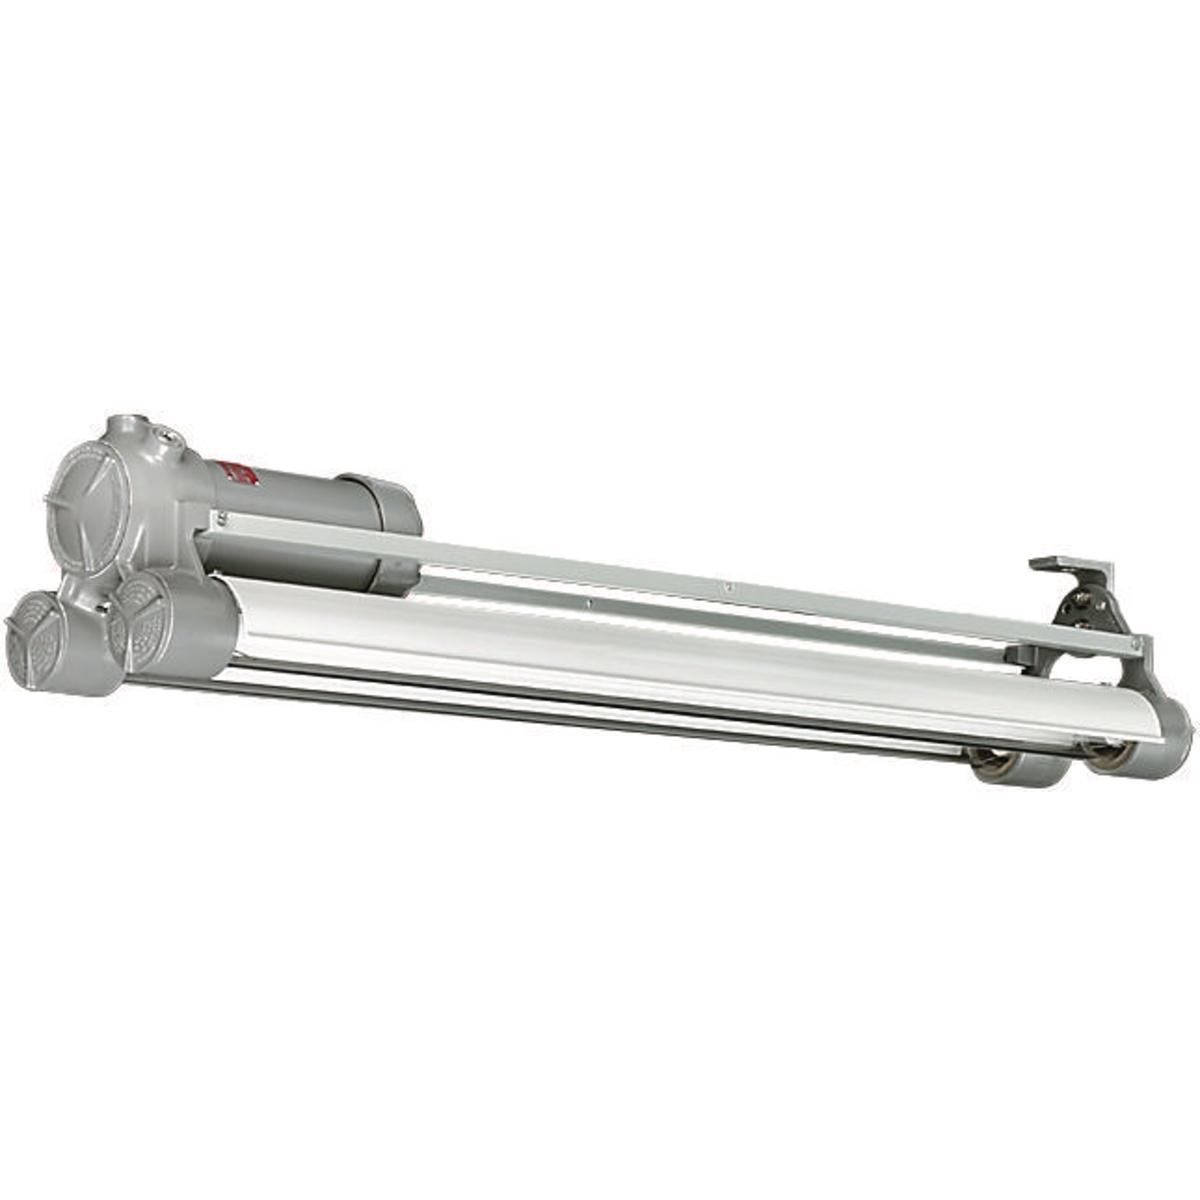 Hubbell HFX-430-42-WL-FB HFX 40W 277V 2 Lamp with Lamps and Fused Ballast  ; UL Listed and labeled for use inside paint spray booths and rooms ; 2’ nominal compact models facilitate use in areas too small for nominal 4’ models, or where the light must be confined ; Standard balla